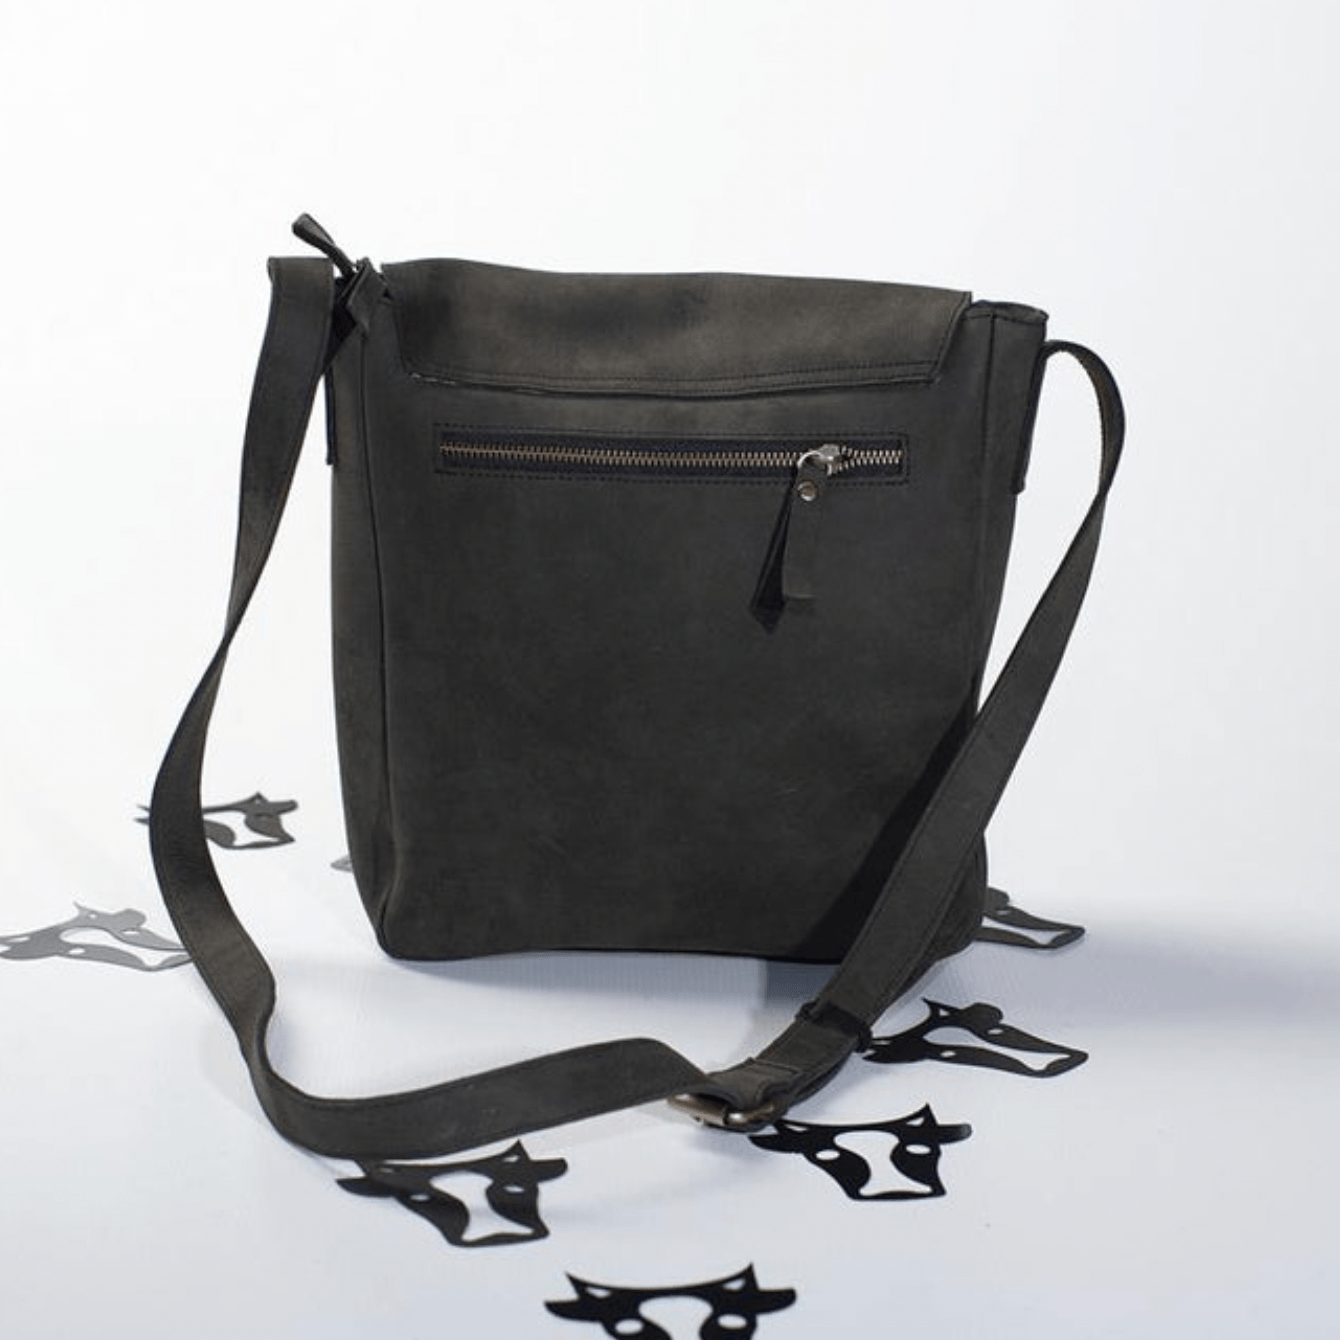 Ring Satchel (crazy horse leather)